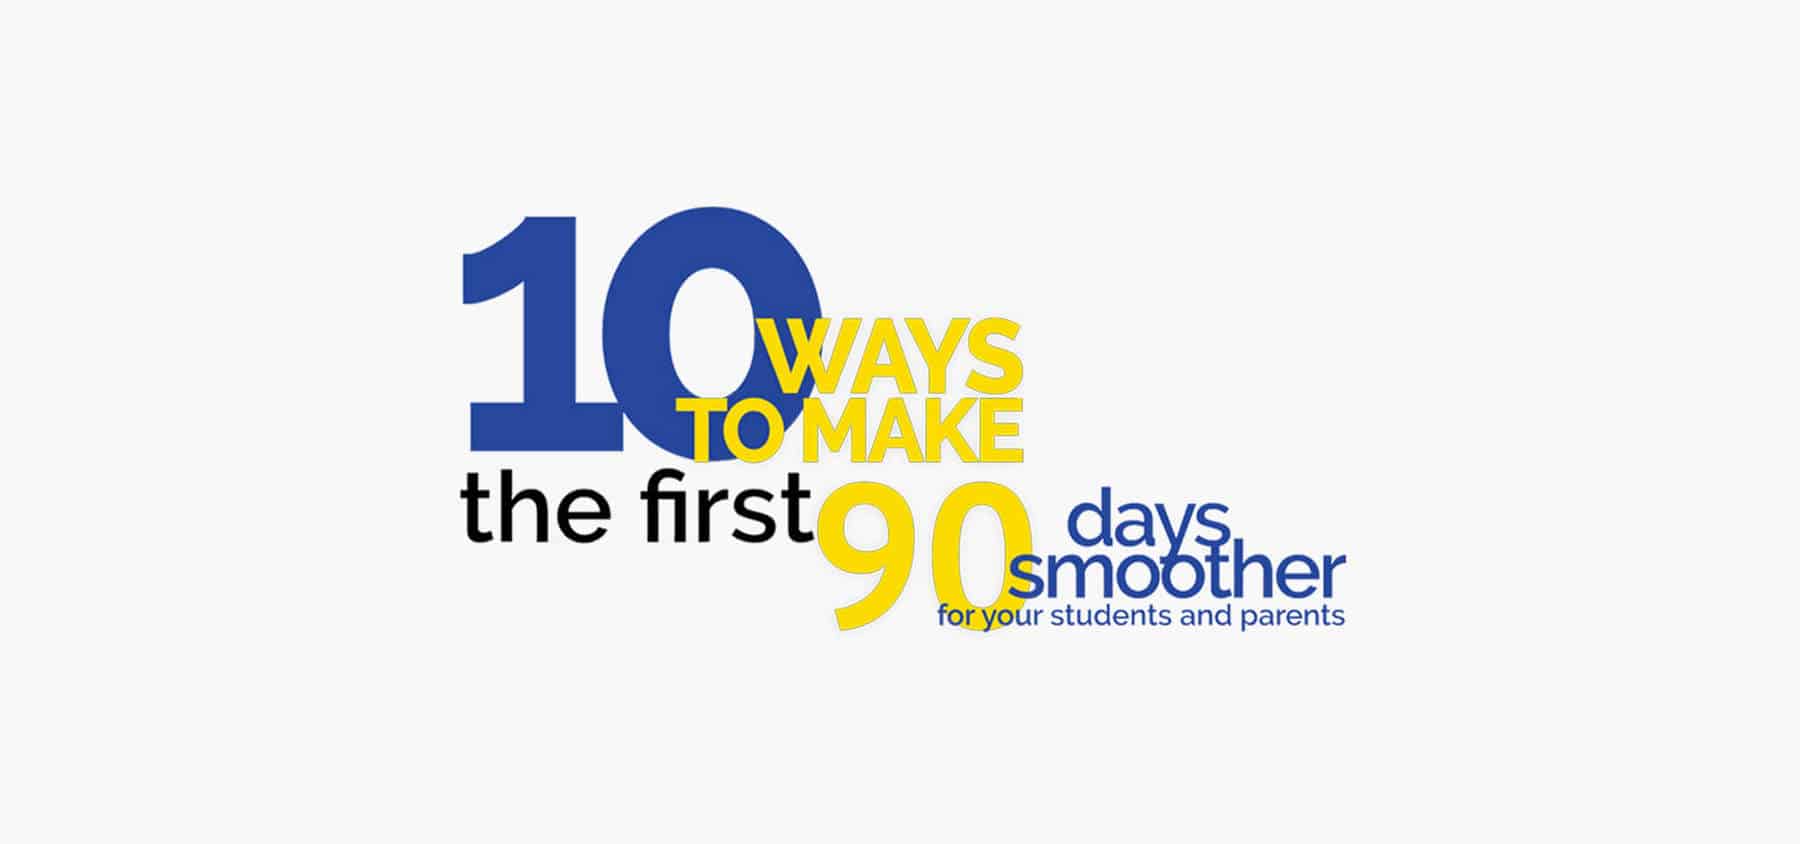 10 Ways to make the first 90 Days smoother